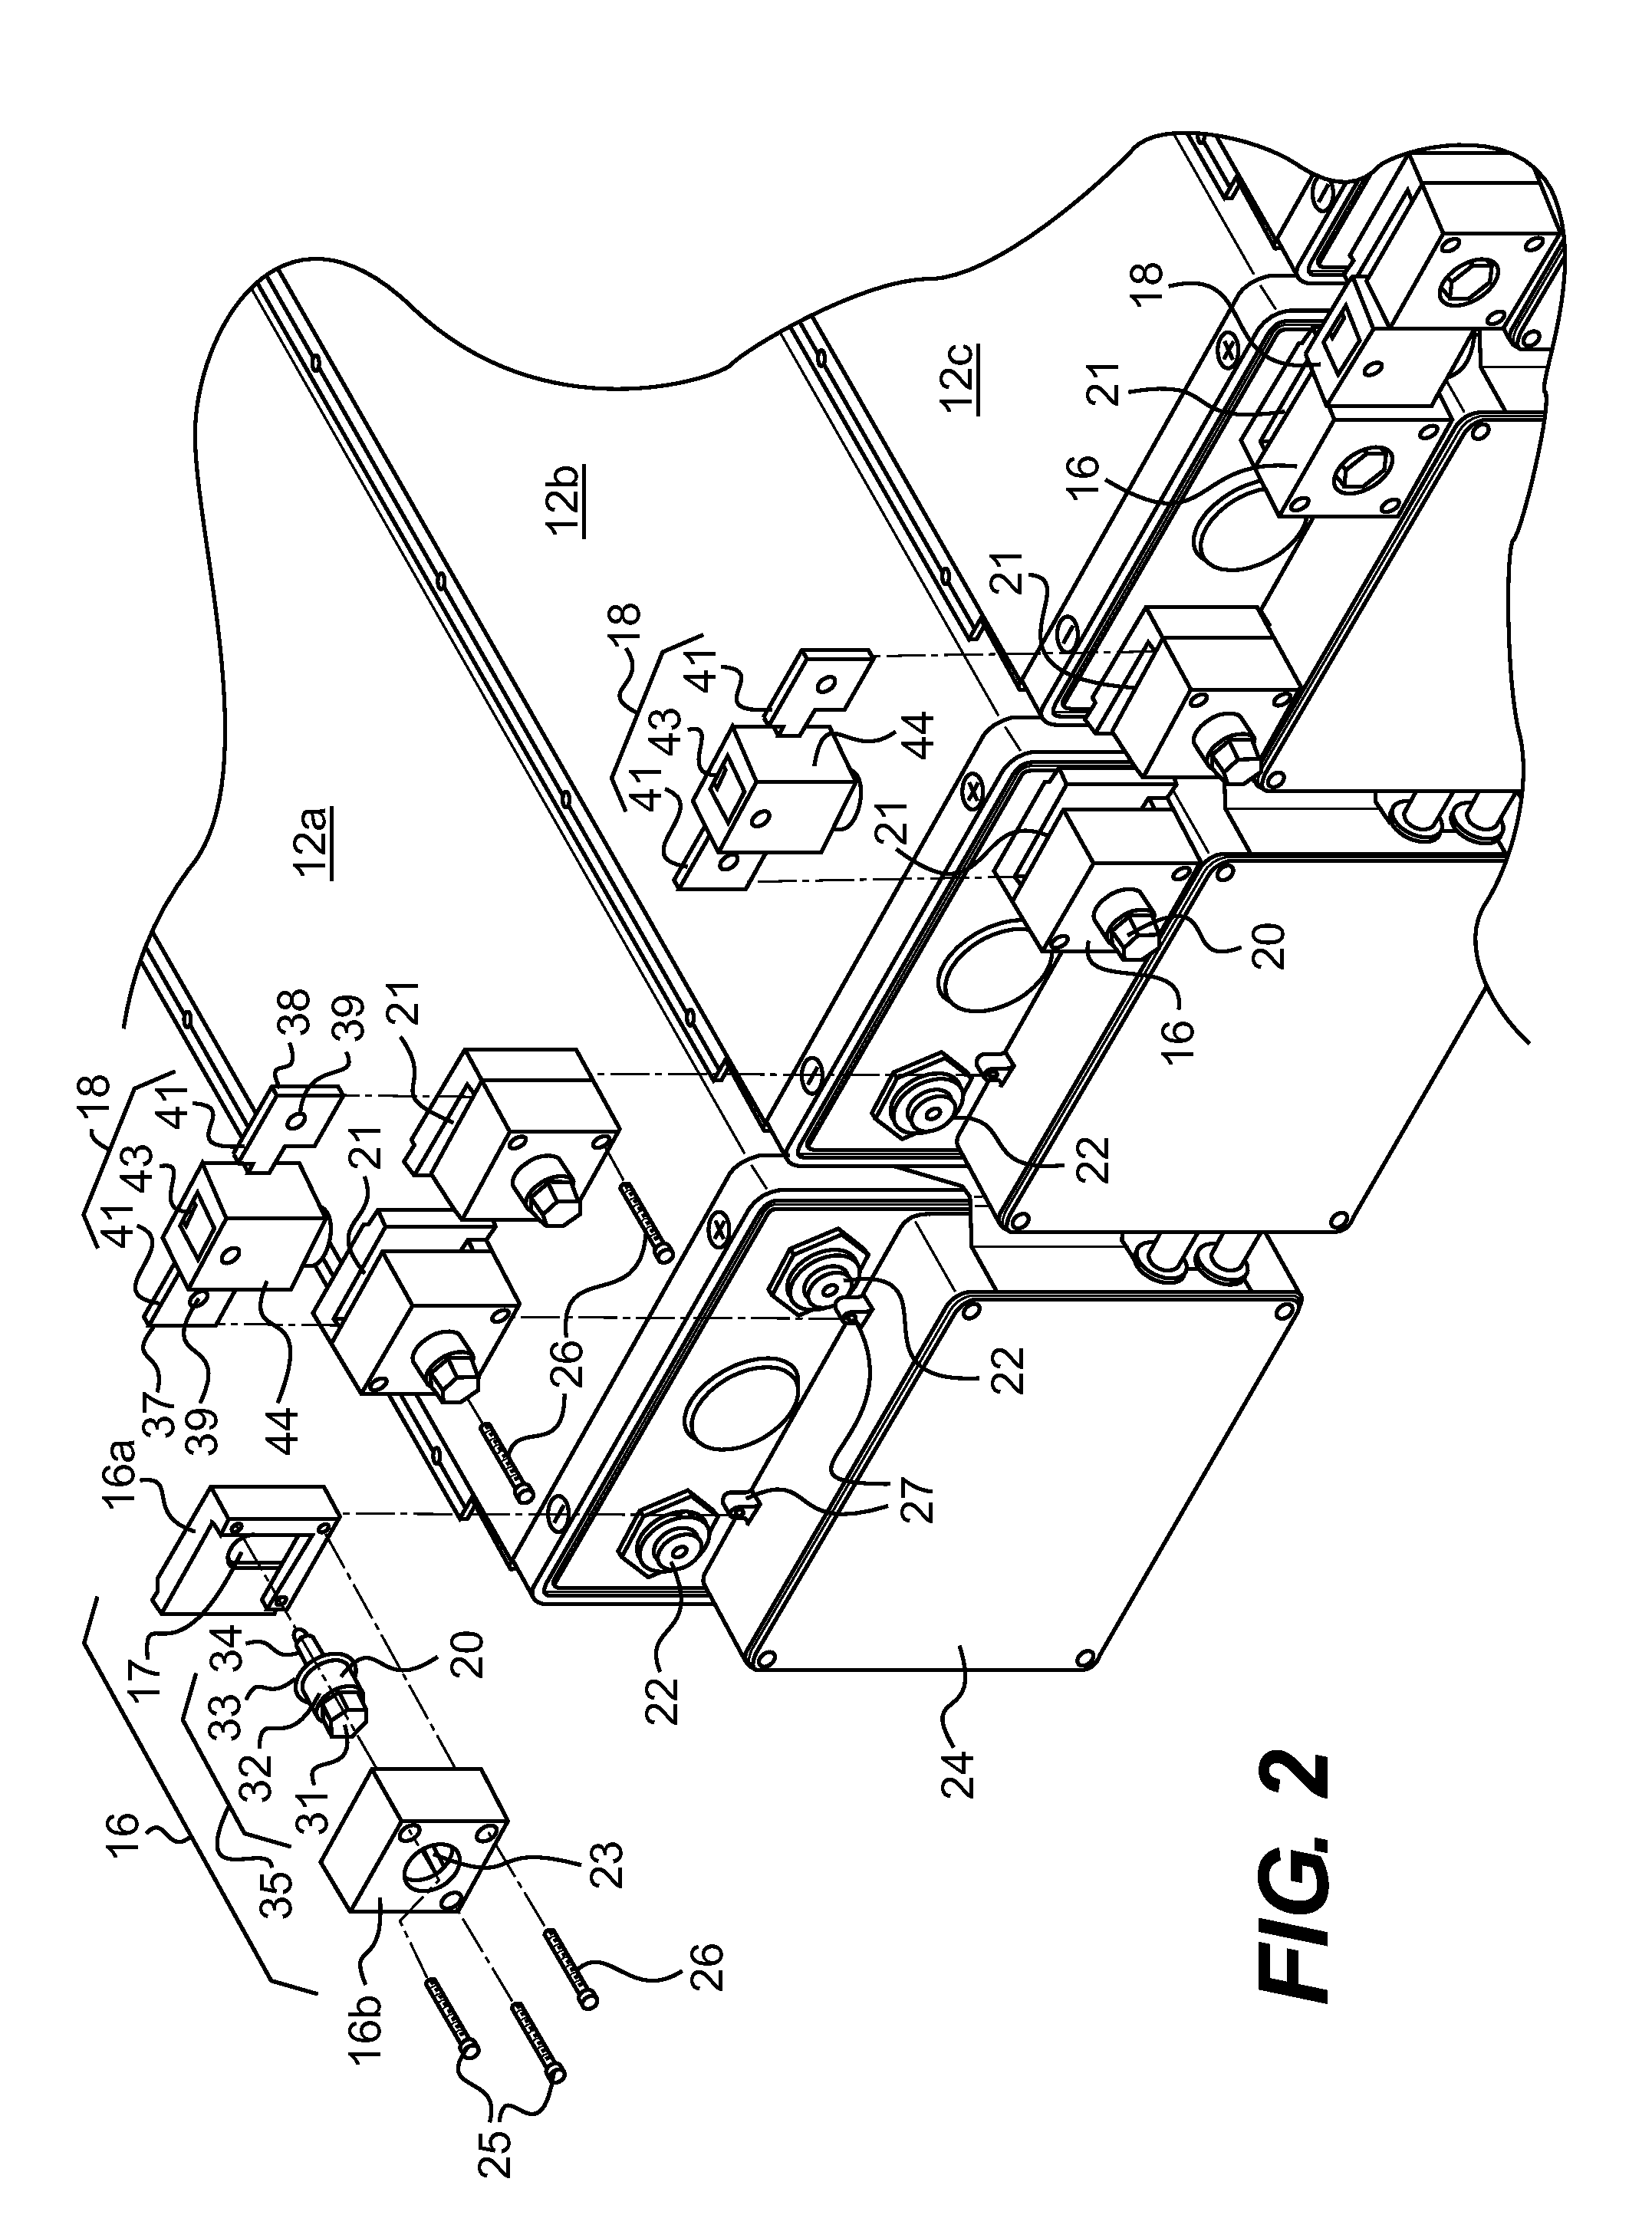 Battery pack with connecting device